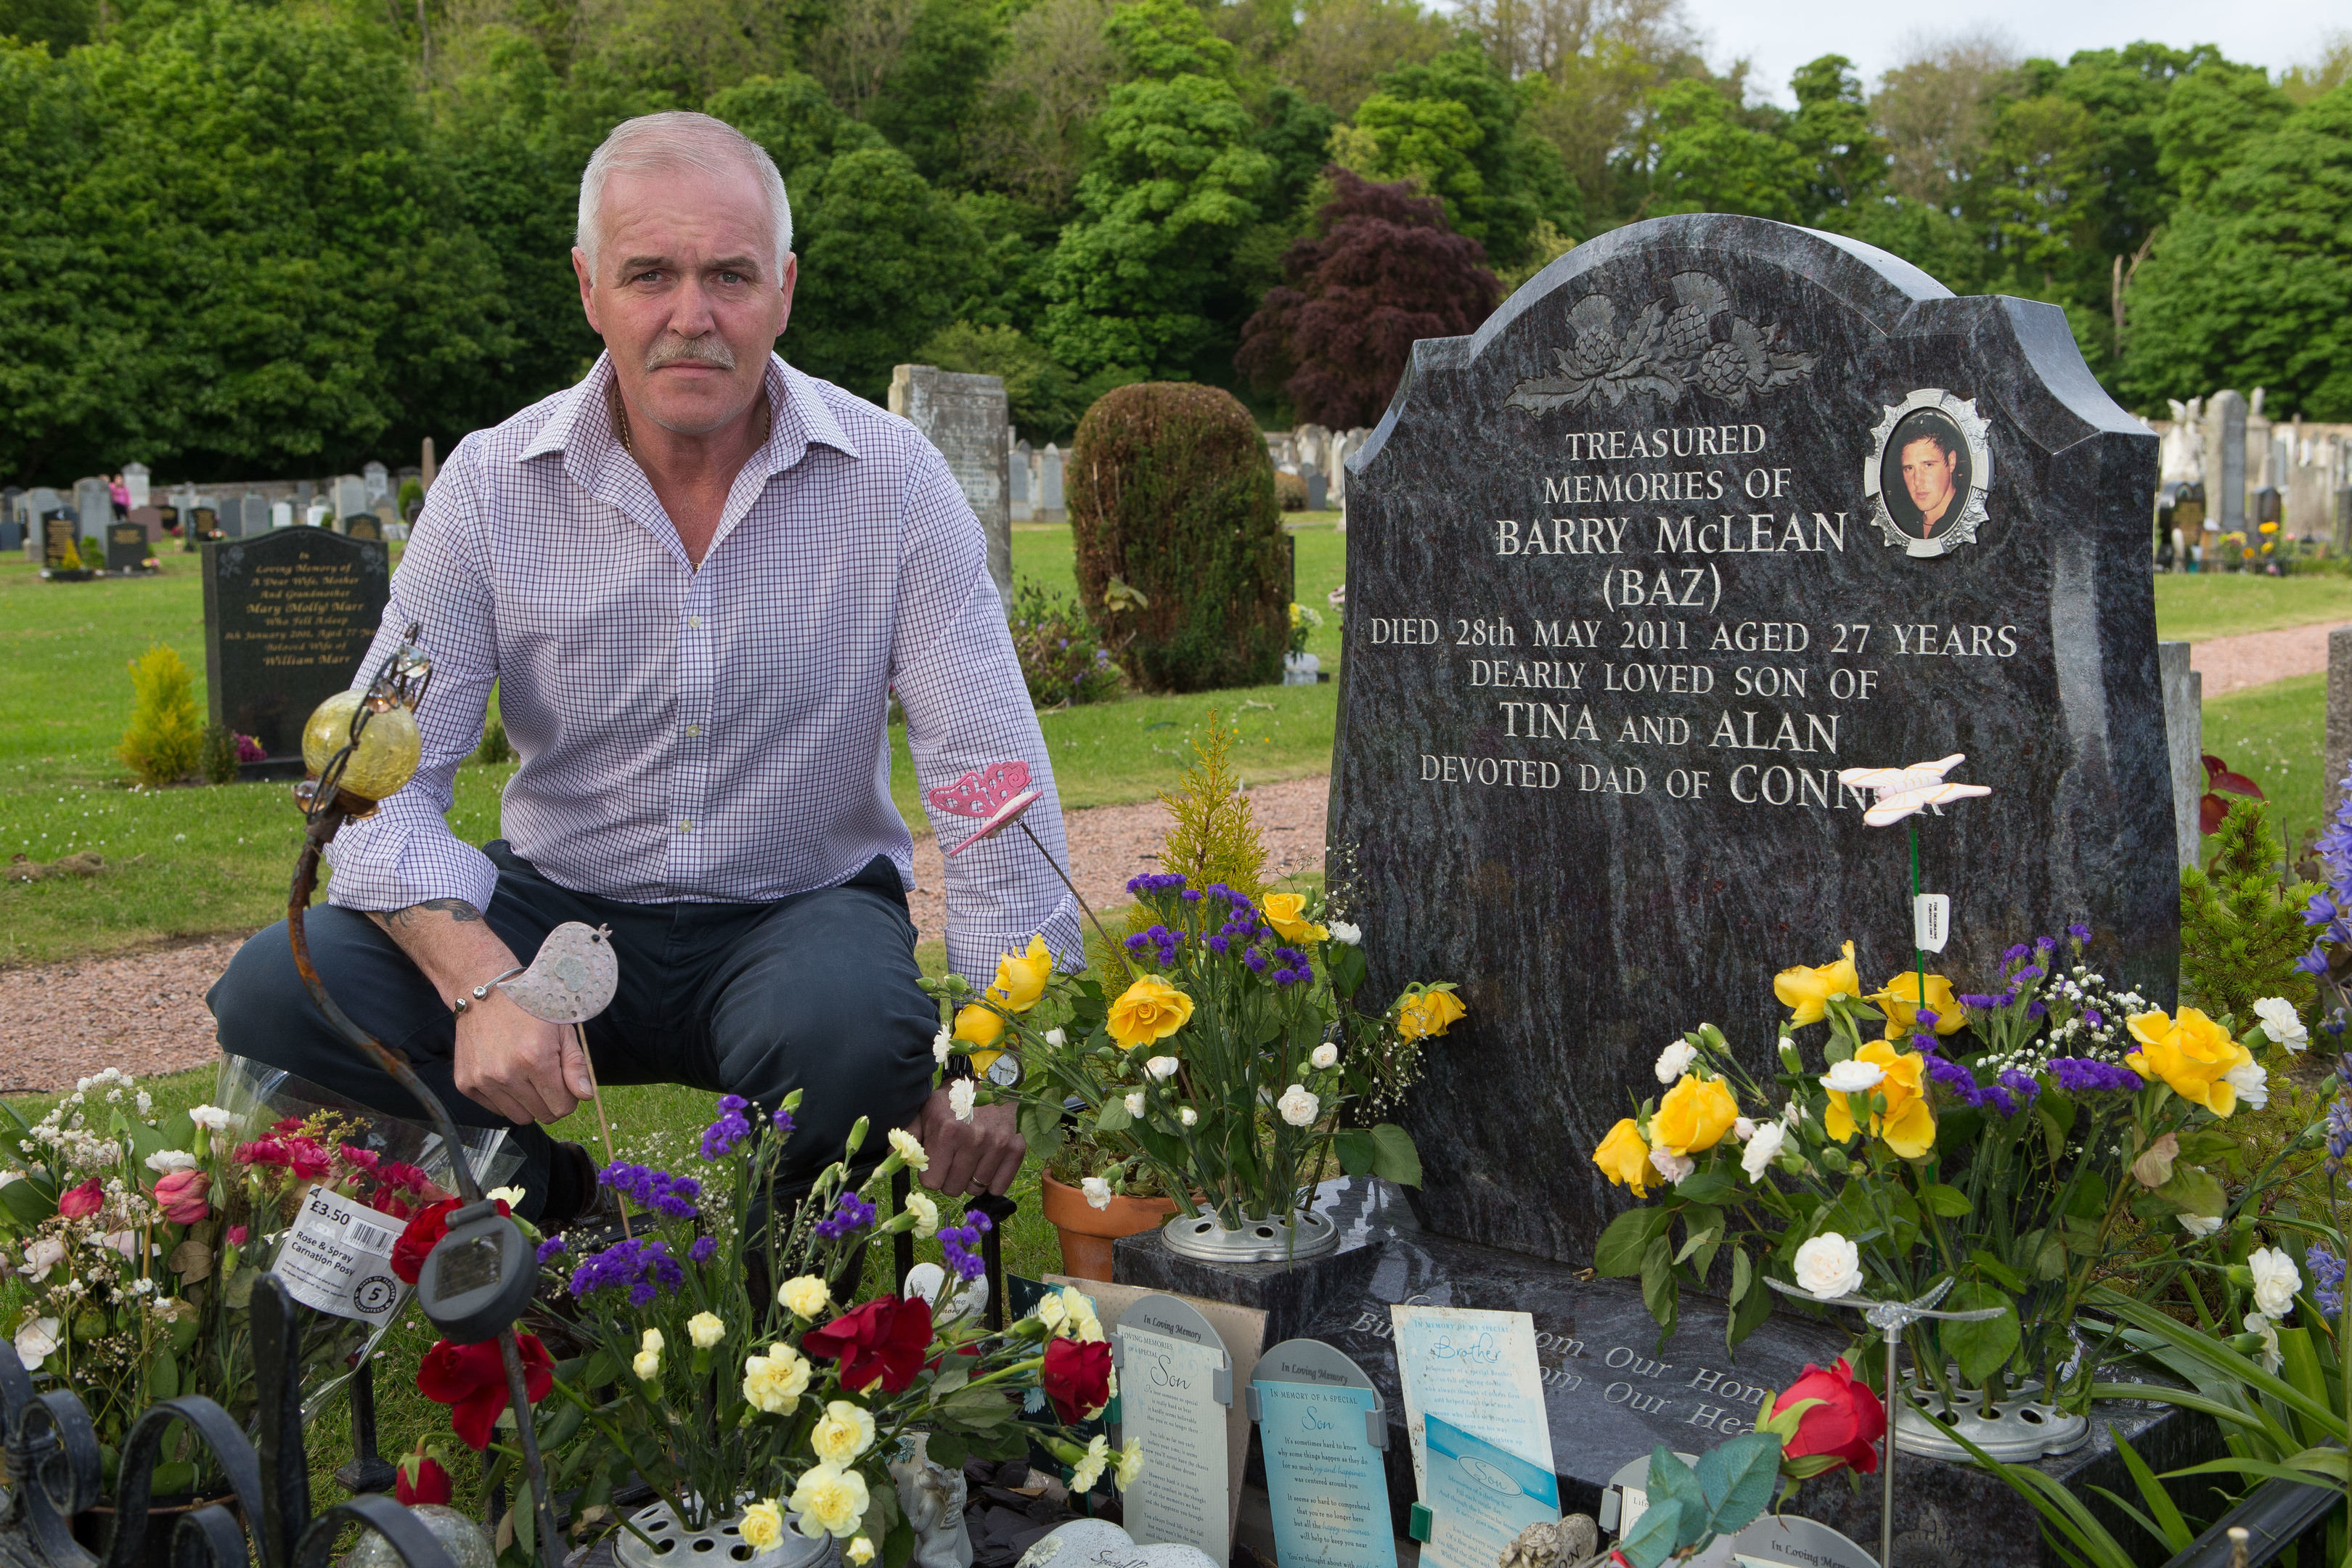 Alan McLean at the grave of his son Barry McLean